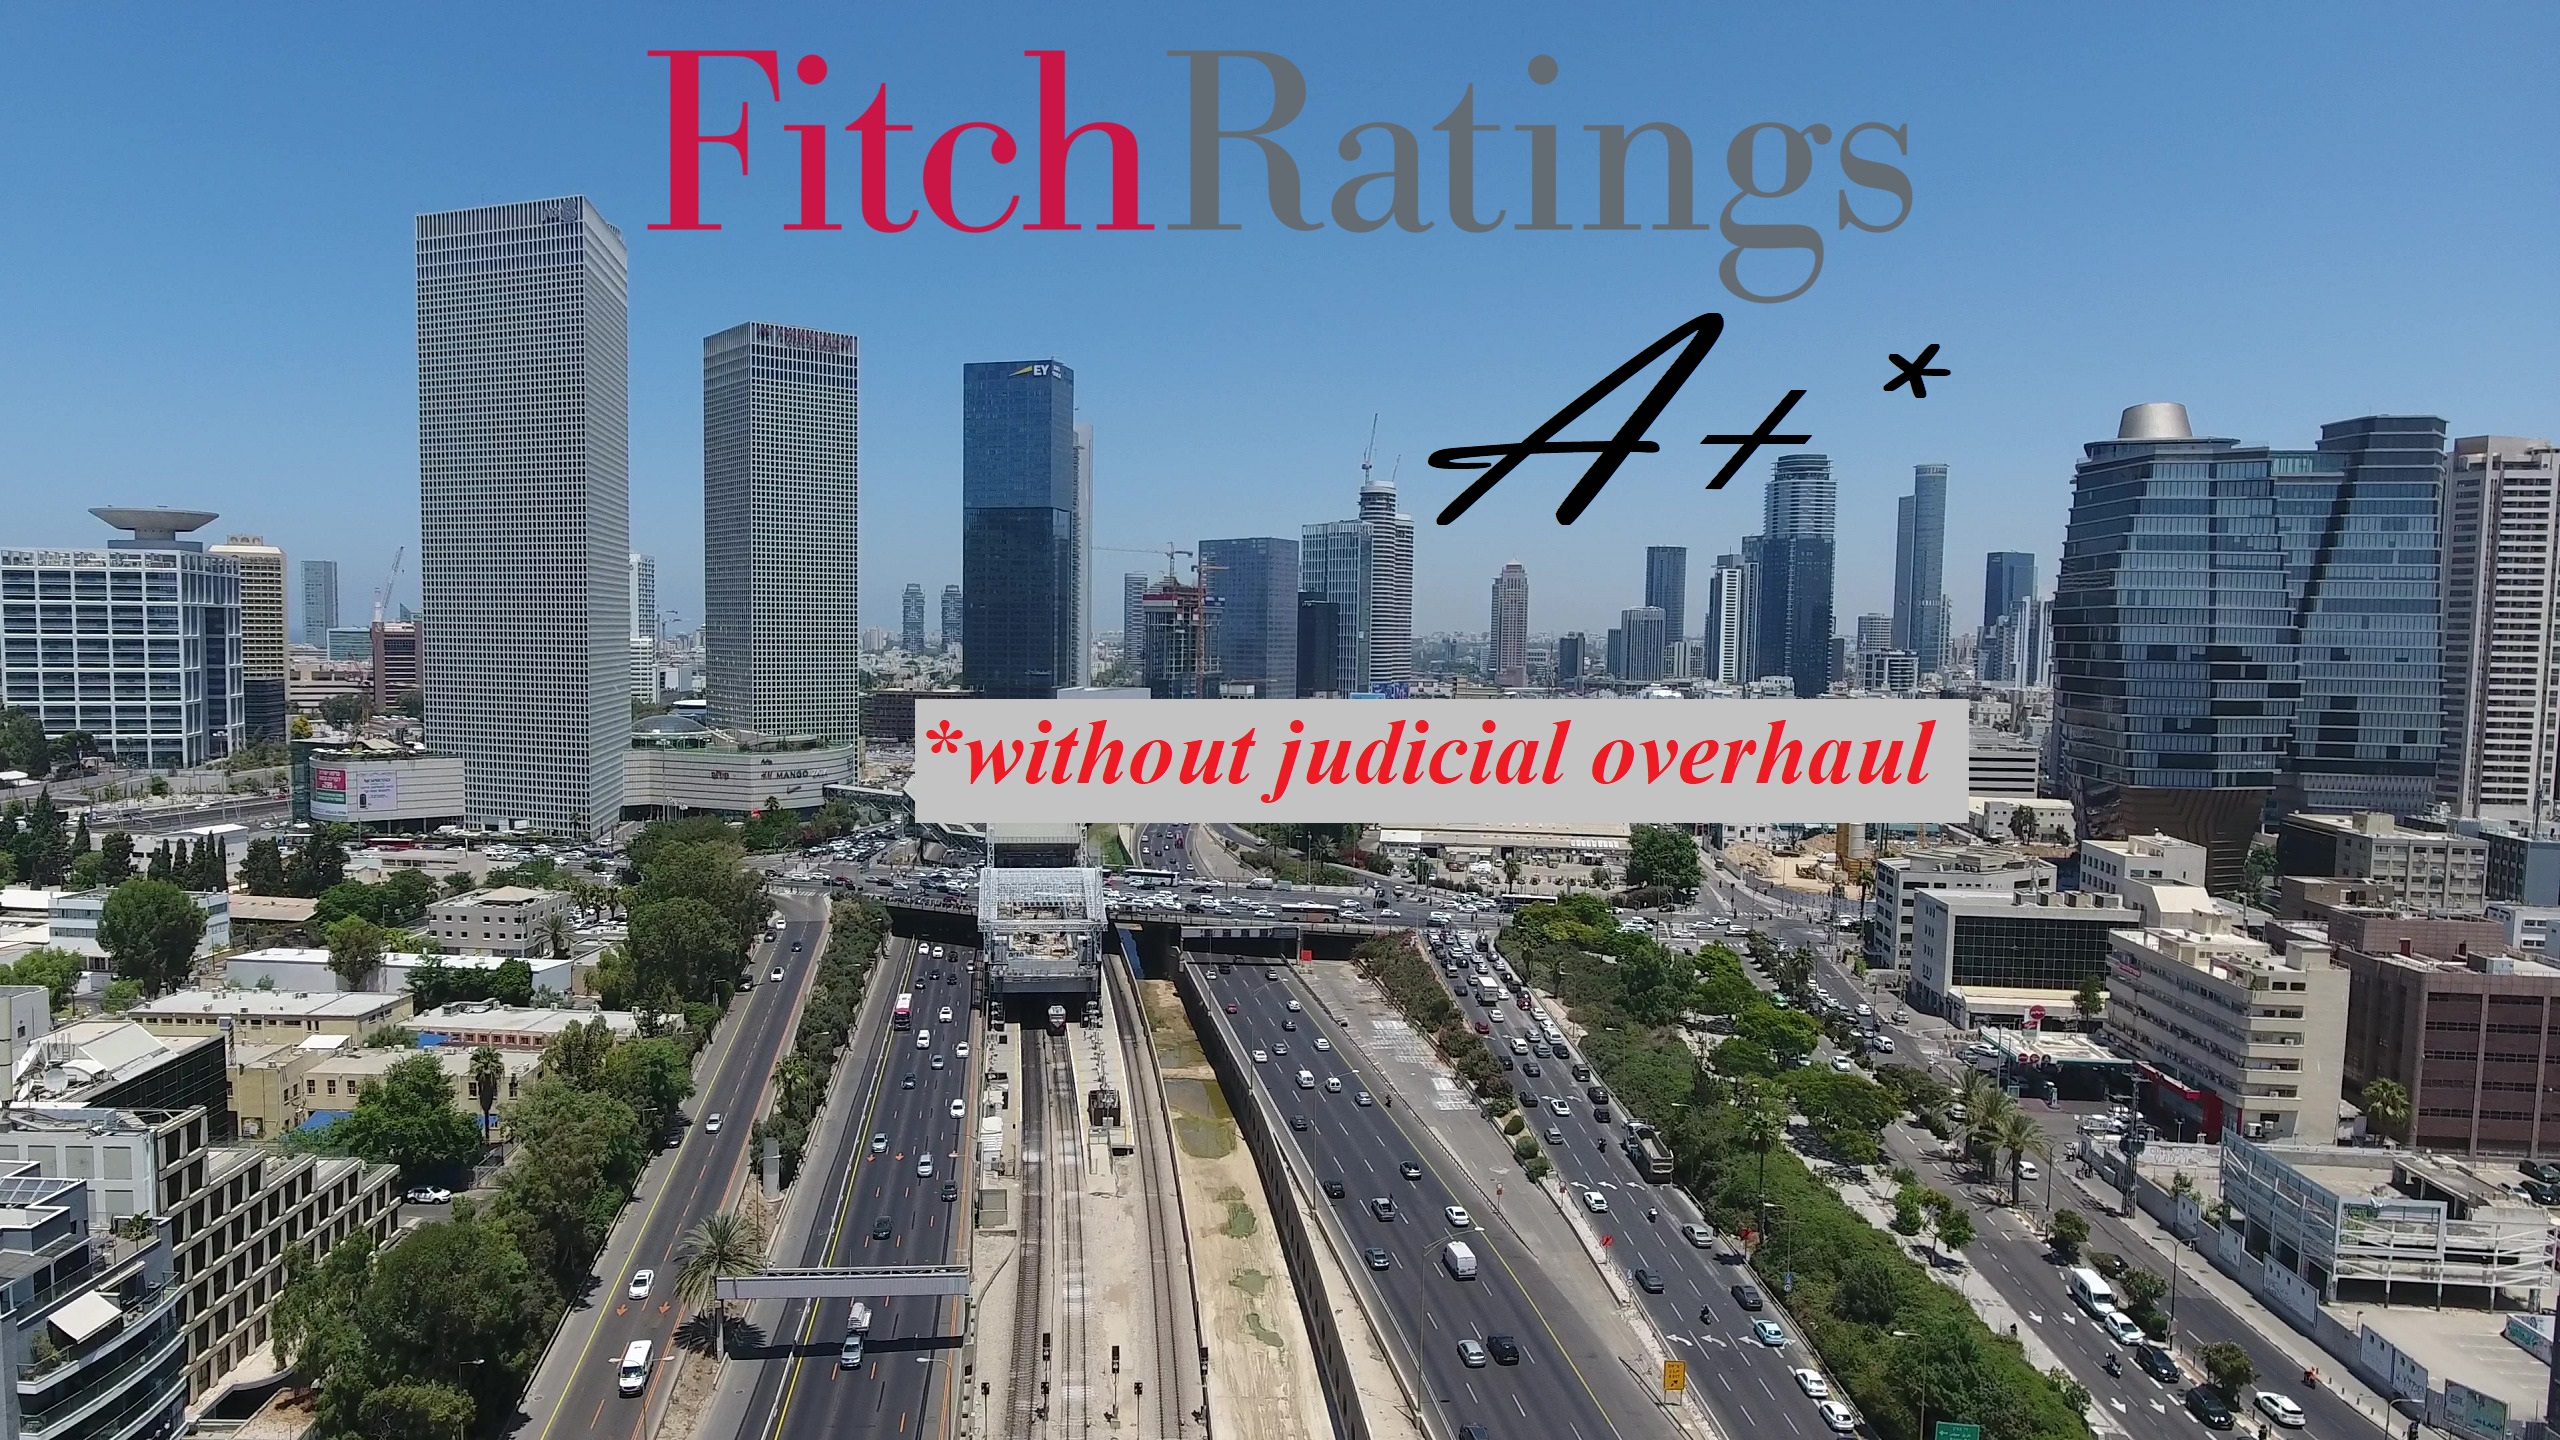 Israel’s Credit Rating Stays Up, With Warning for Downgrade Should Judicial Overhaul Continue